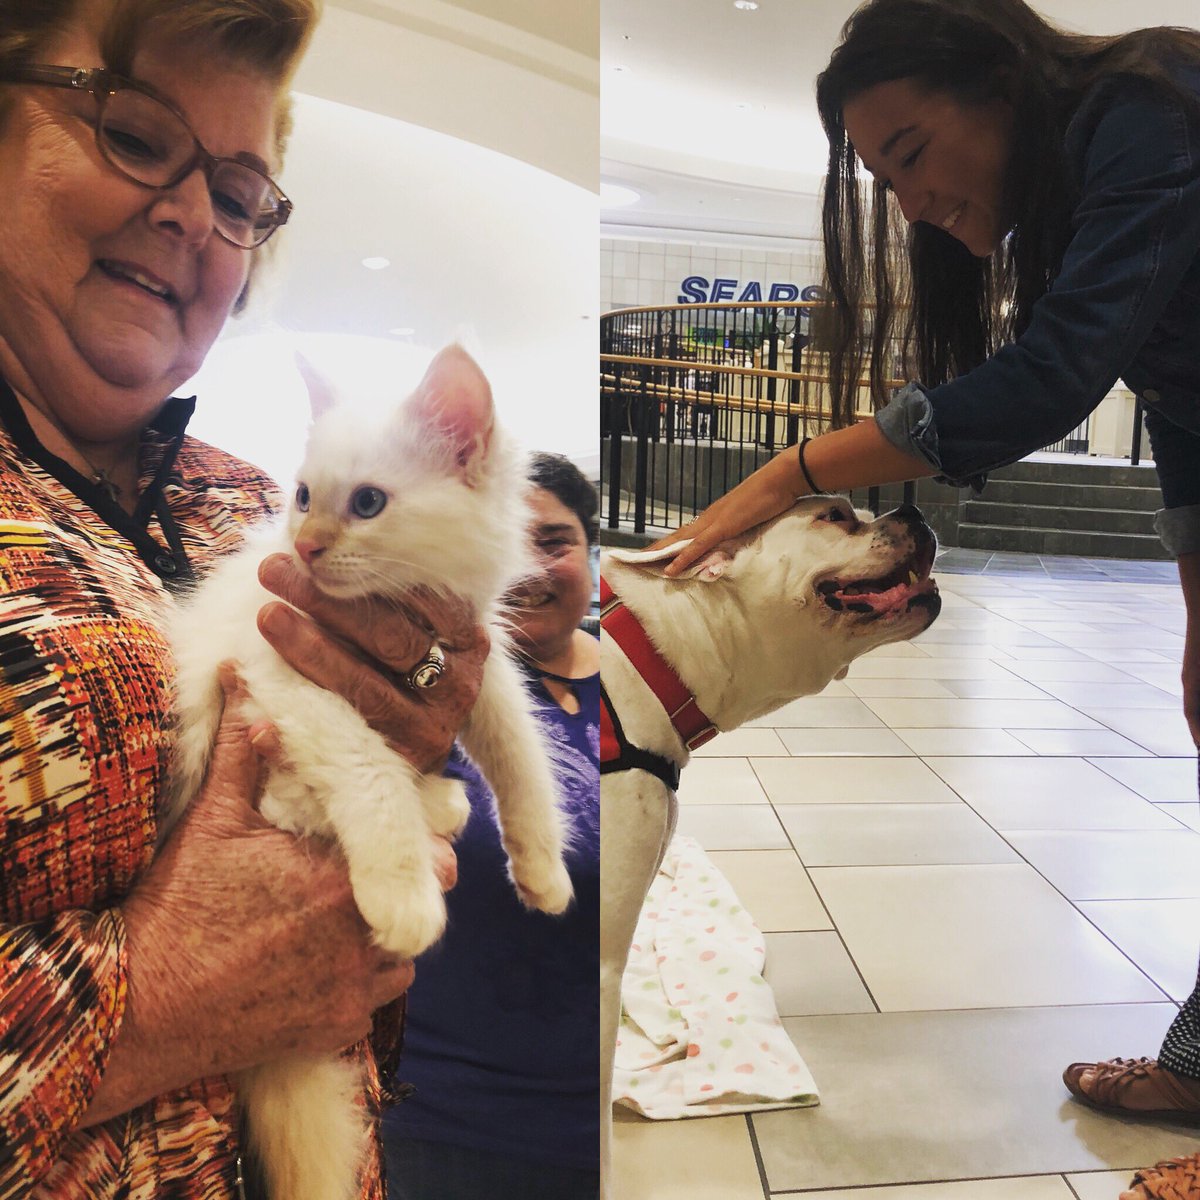 Just a #throwbackthursday from our @nhspca Adopt a Pet event last Saturday! 😘🐶🐱 💕 #familylife #family #familygoals #pets #adoption #adoptpets #event #malls #mallevent #goals #thursday #thursdayvibes #thursdaythoughts #thursdaymotivation #animals #kittens